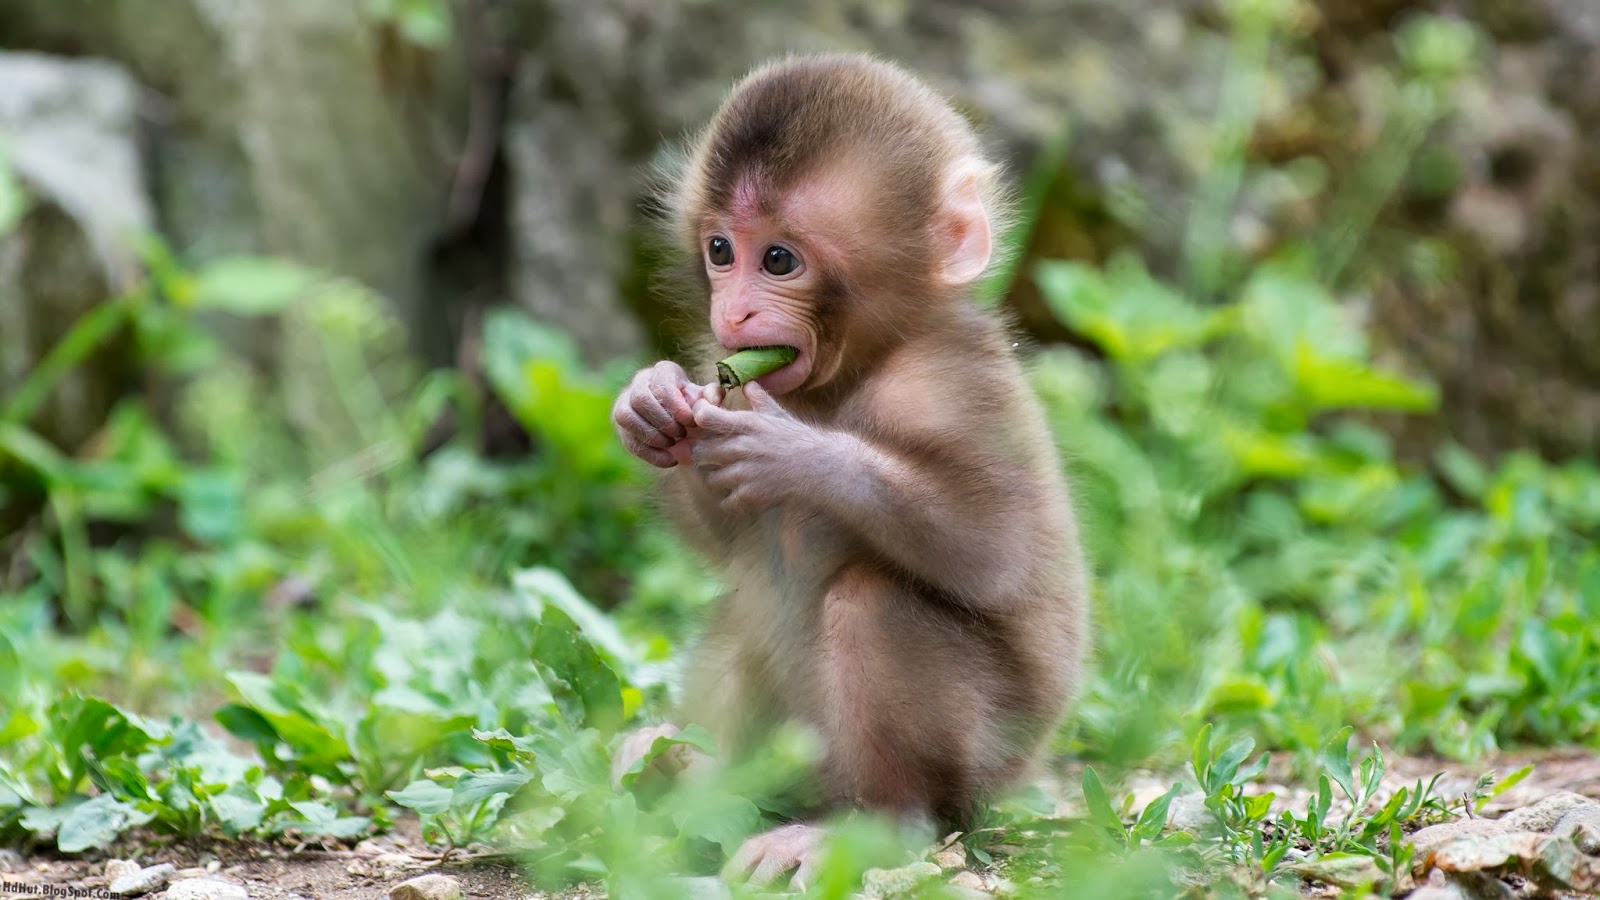 Cute Monkey Wallpaper In HD Funny And